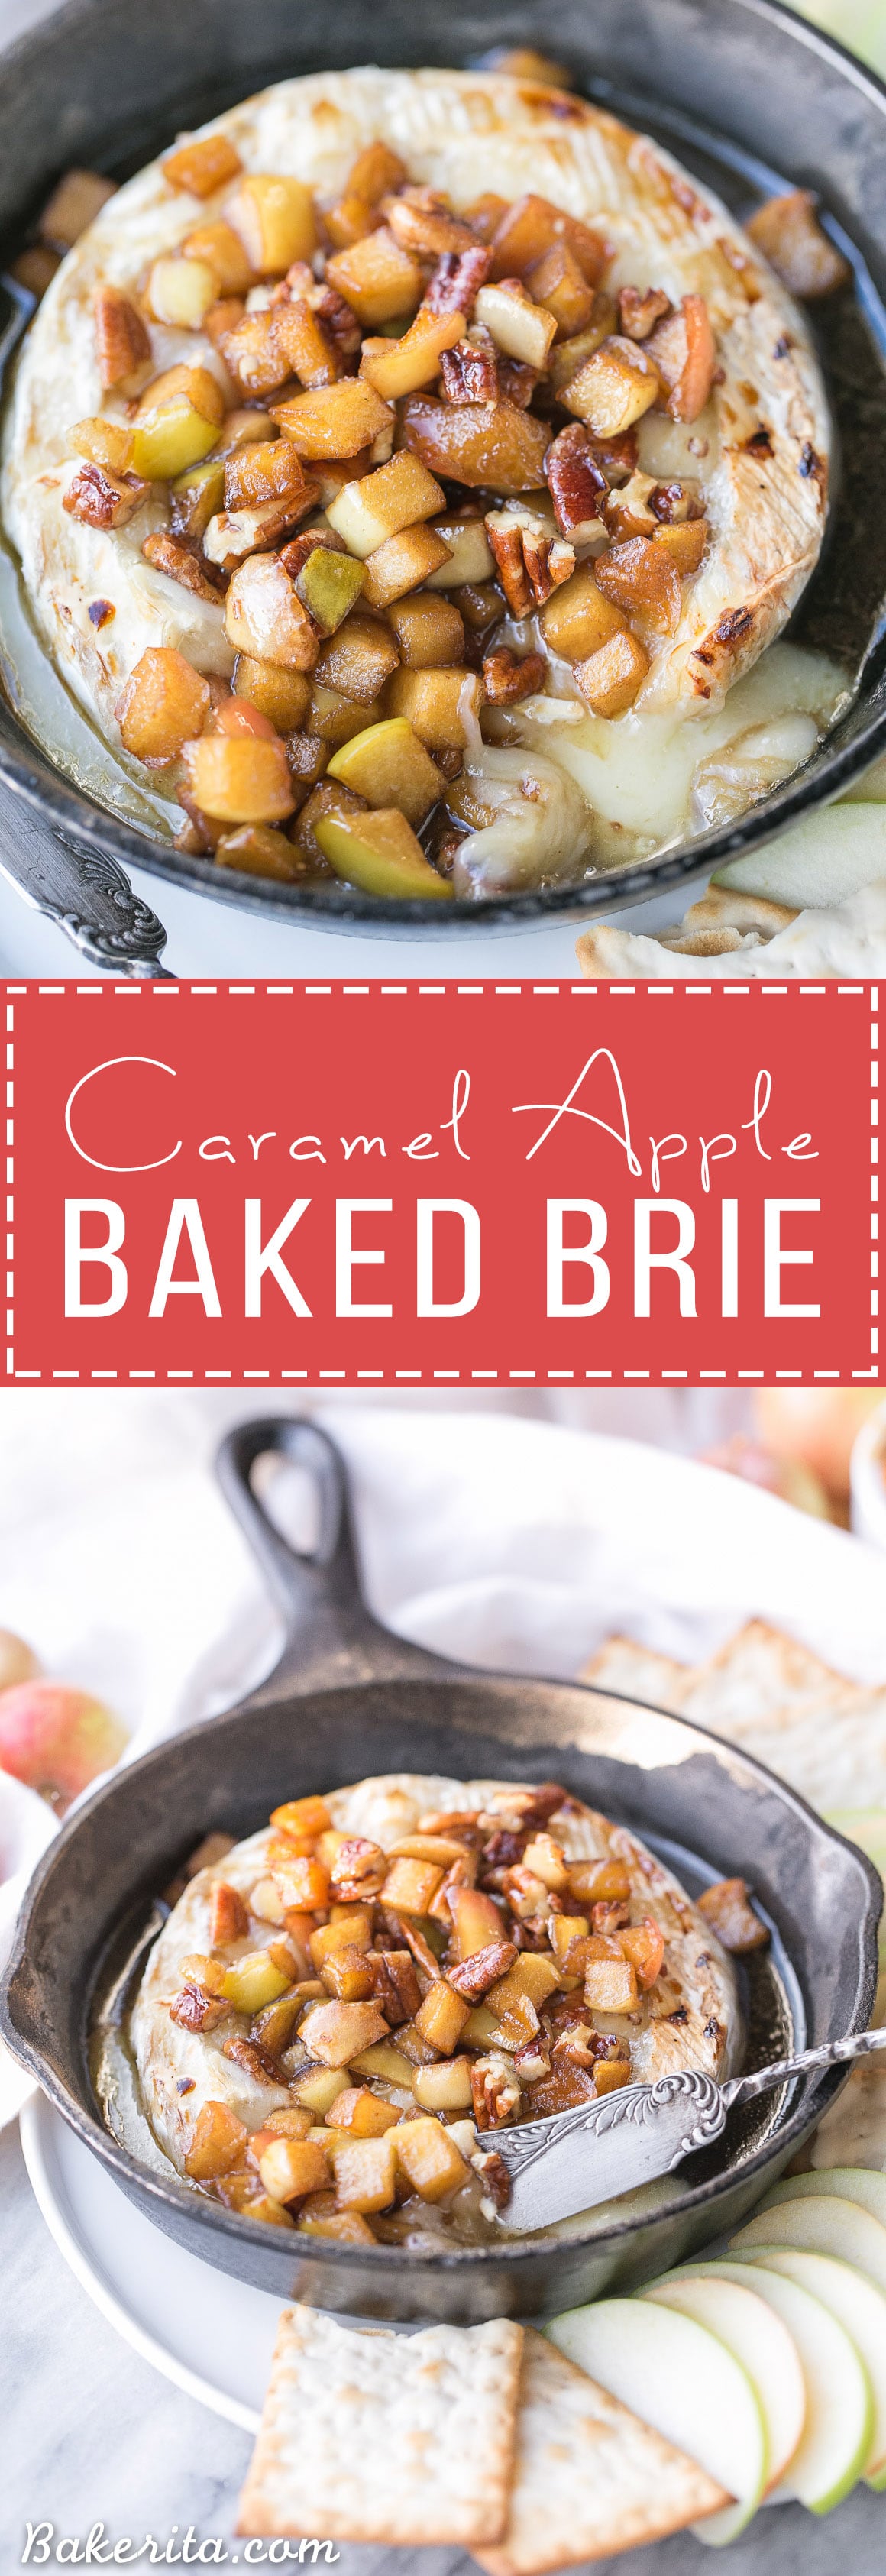 Caramel Apple Baked Brie is a gooey, scrumptious appetizer that's perfect for holiday entertaining! This easy recipe has a caramel apple topping piled on top of wheel of melted brie. It only has 5 ingredients and takes 20 minutes from start to finish.